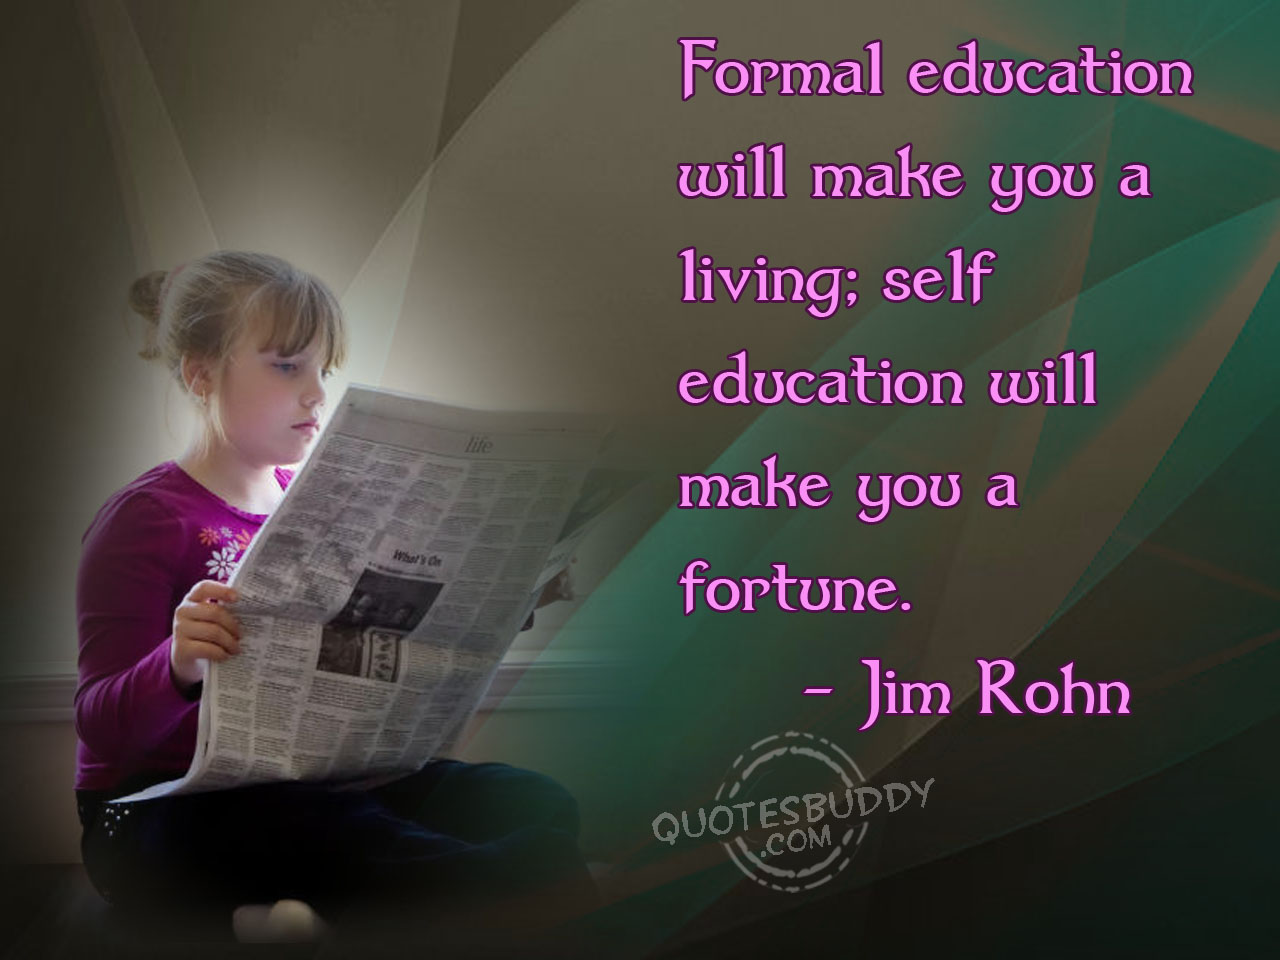 Formal education will make you a living self education will make you a fortune. Jim Rohn